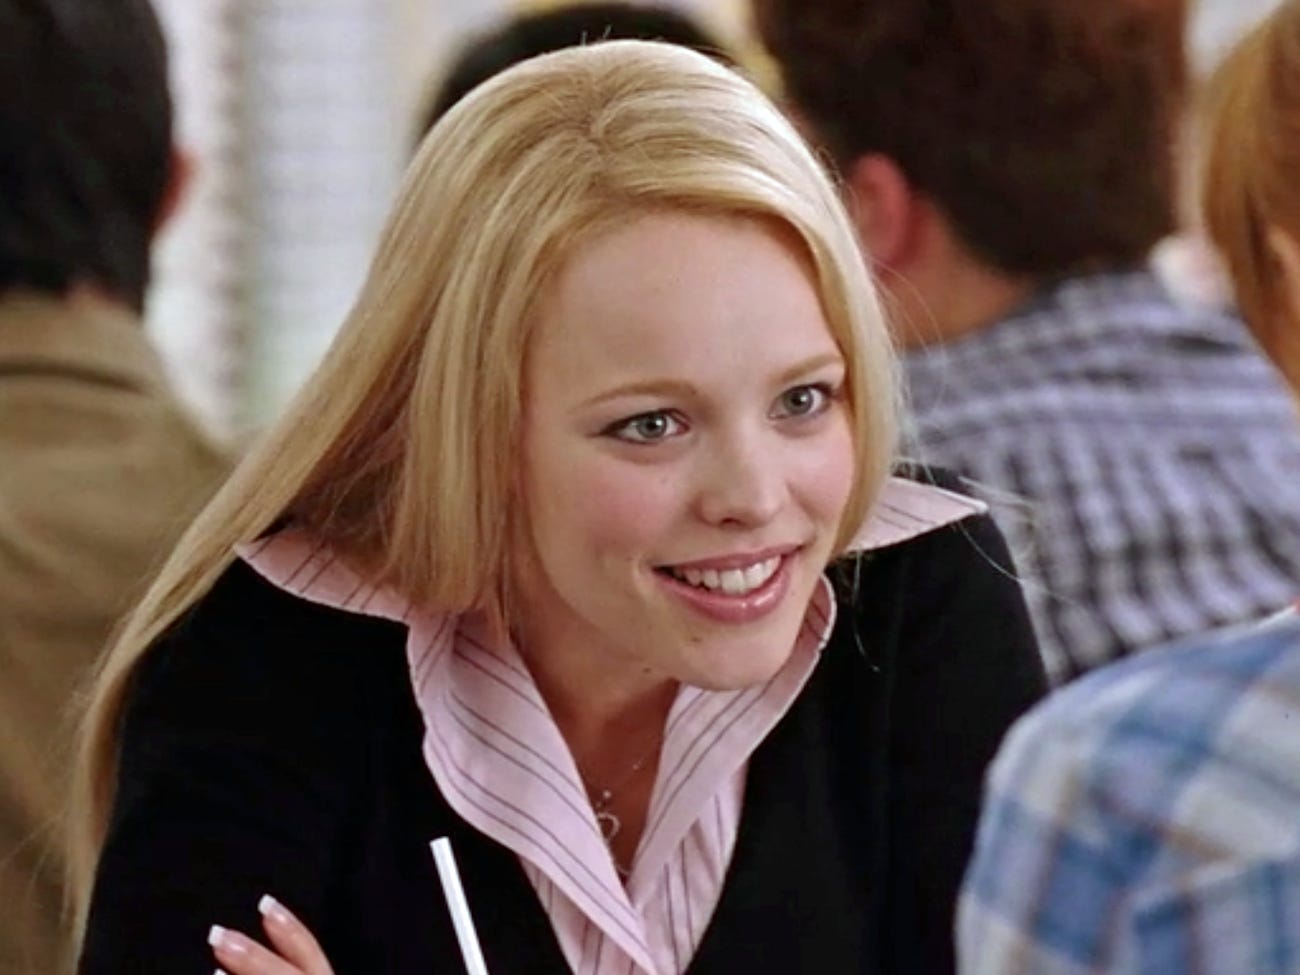 In Defense of the Mean Girl - by Madison Huizinga